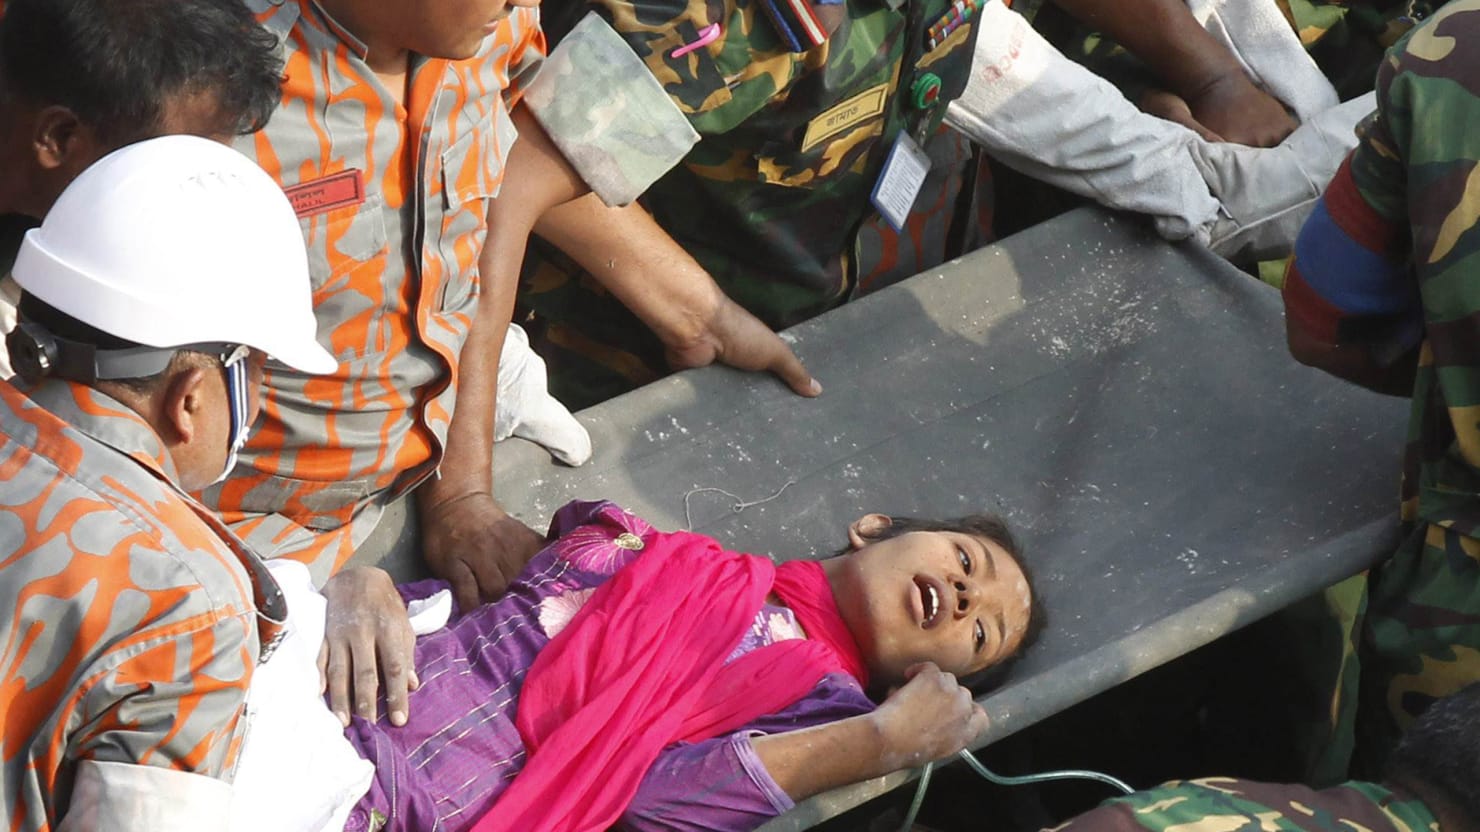 Woman Rescued From Rubble 17 Days After Bangladesh Factory Collapse 